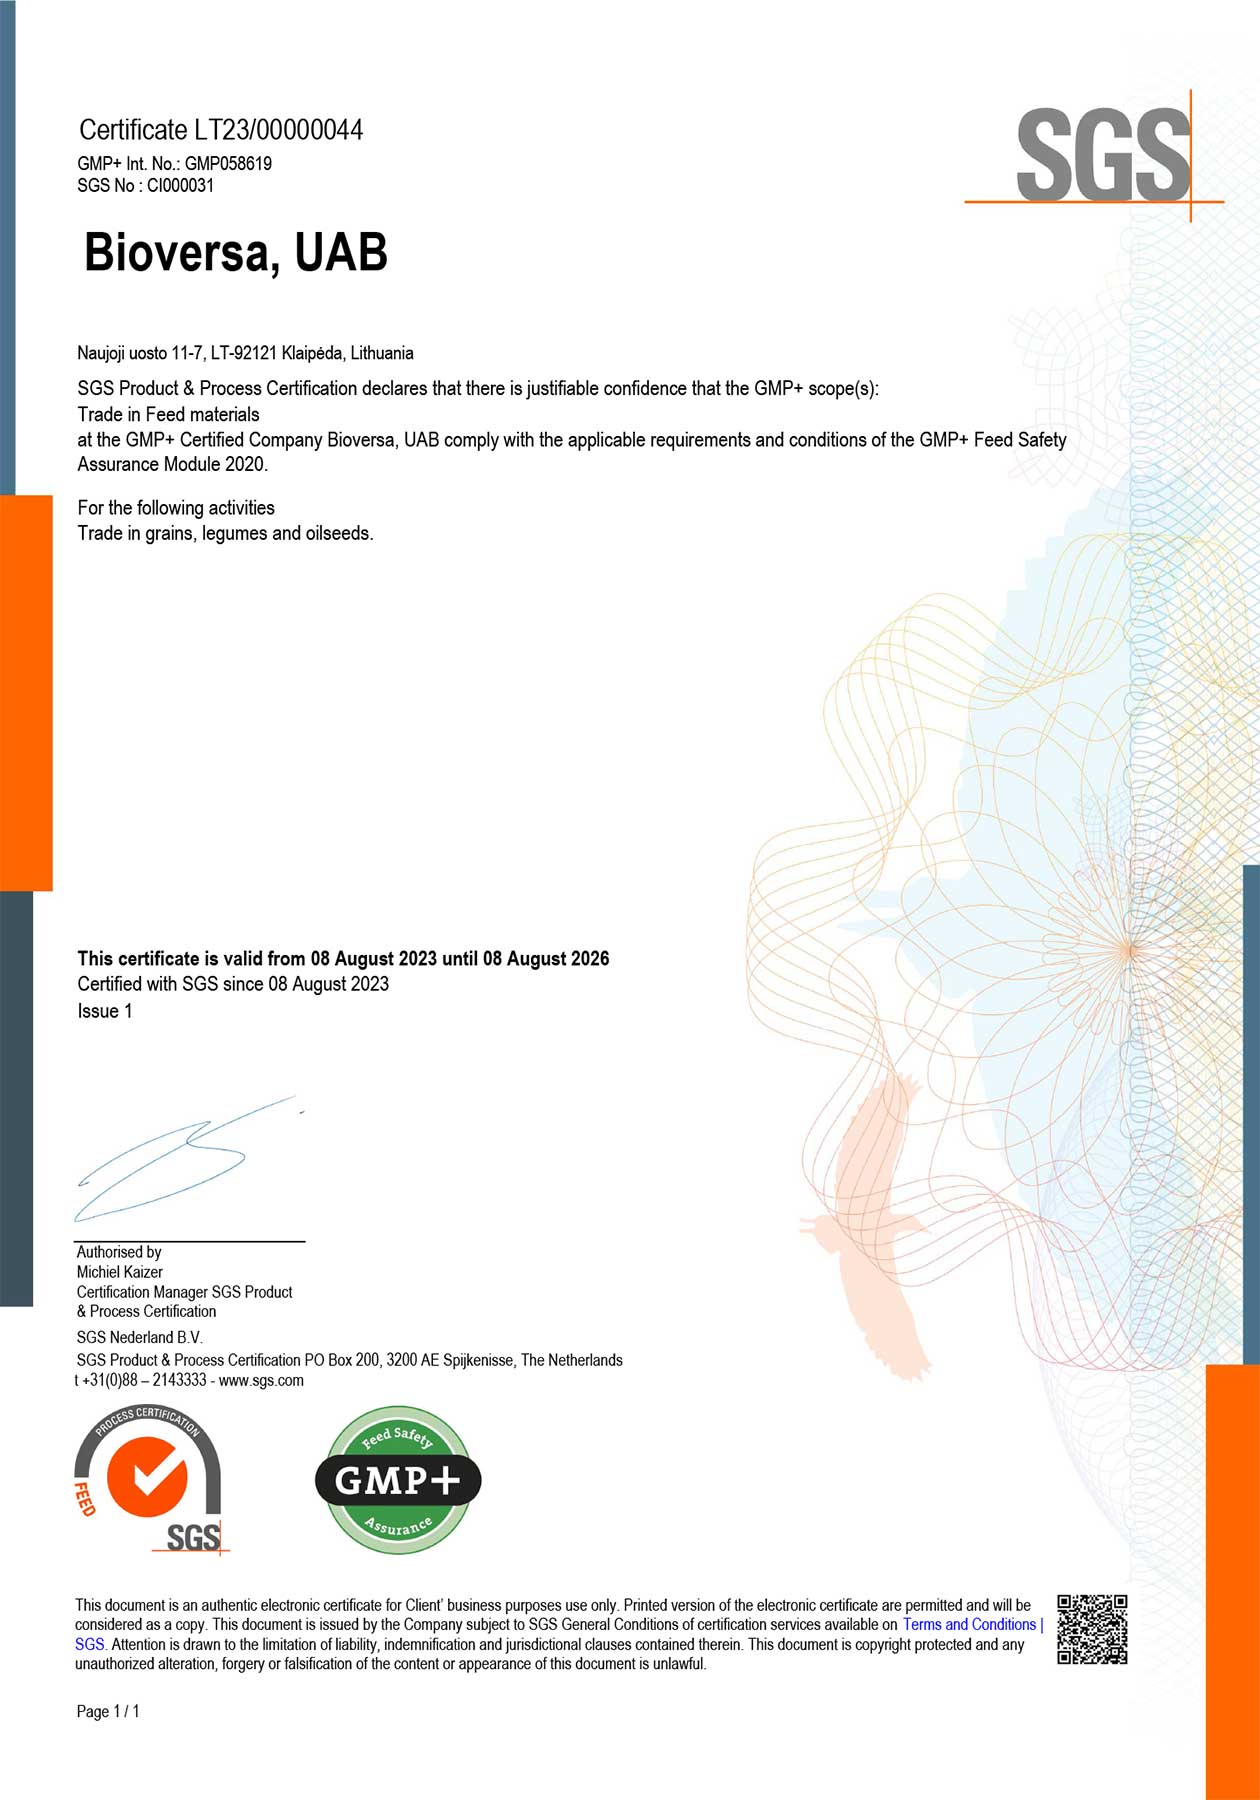 SGS Product & Process Certification